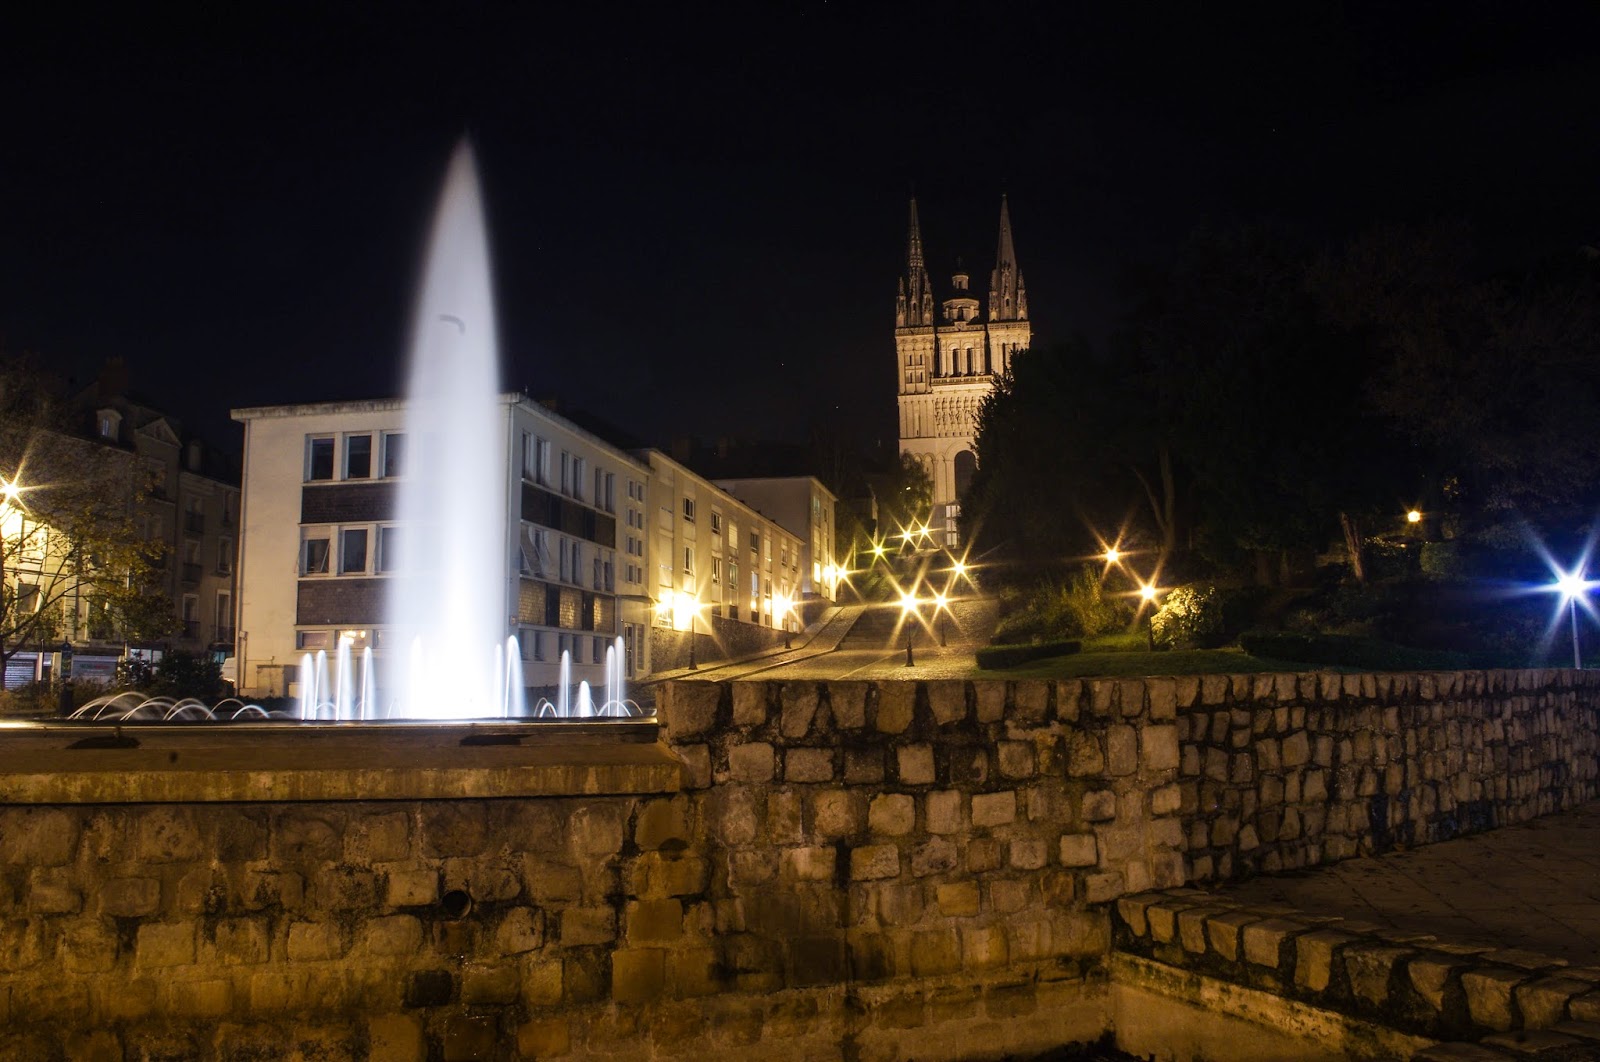 http://jerogiphotography.blogspot.com/2014/12/angers-by-night-iii.html